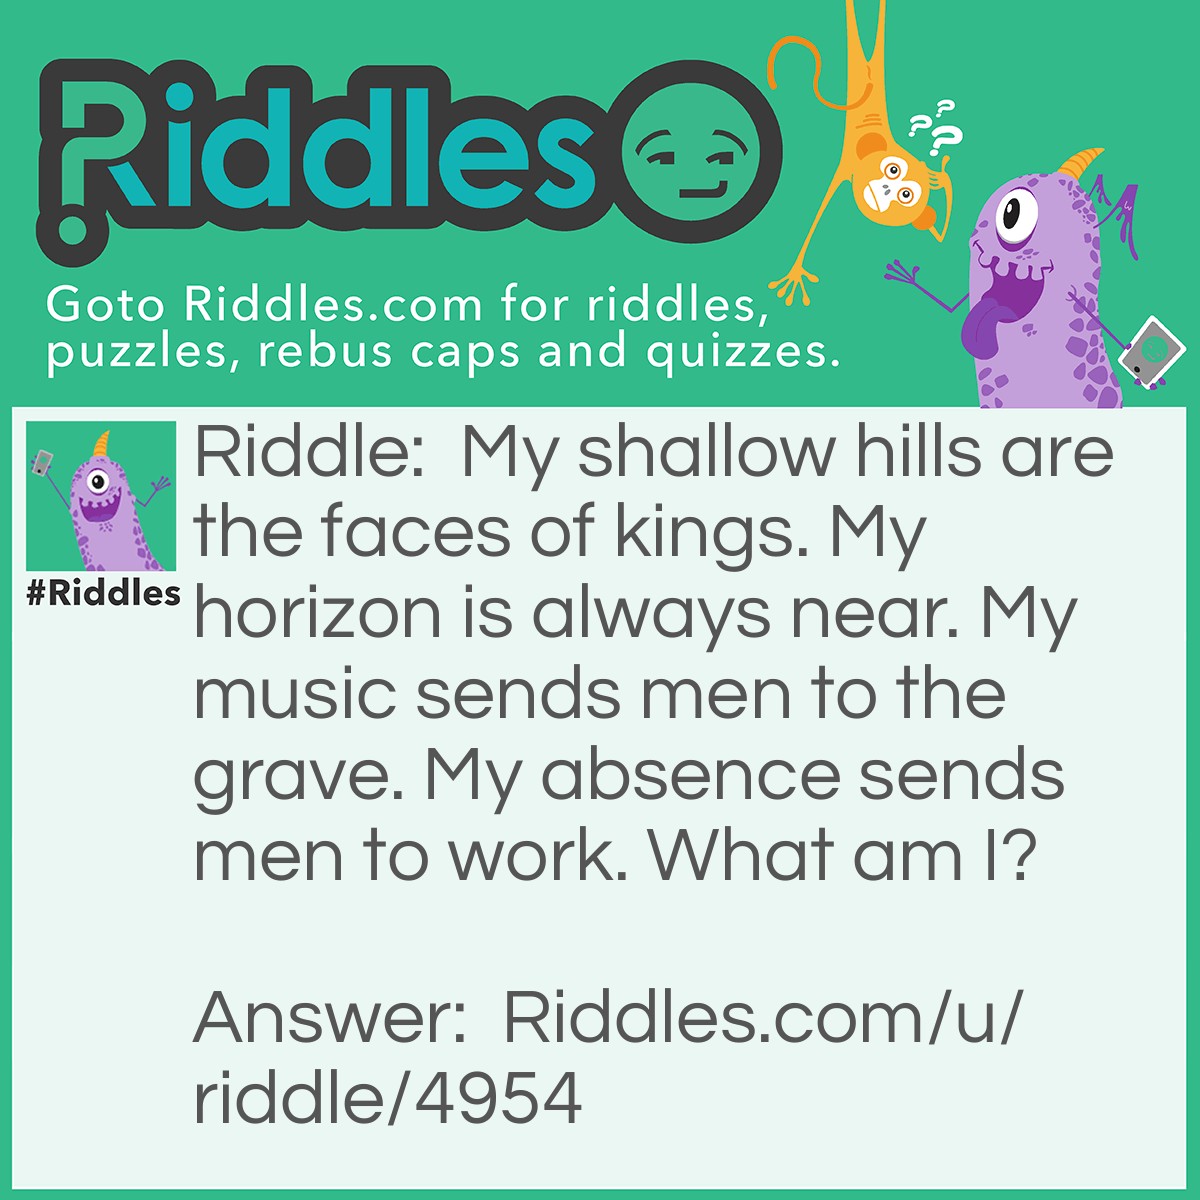 Riddle: My shallow hills are the faces of kings. My horizon is always near. My music sends men to the grave. My absence sends men to work. What am I? Answer: Coins.